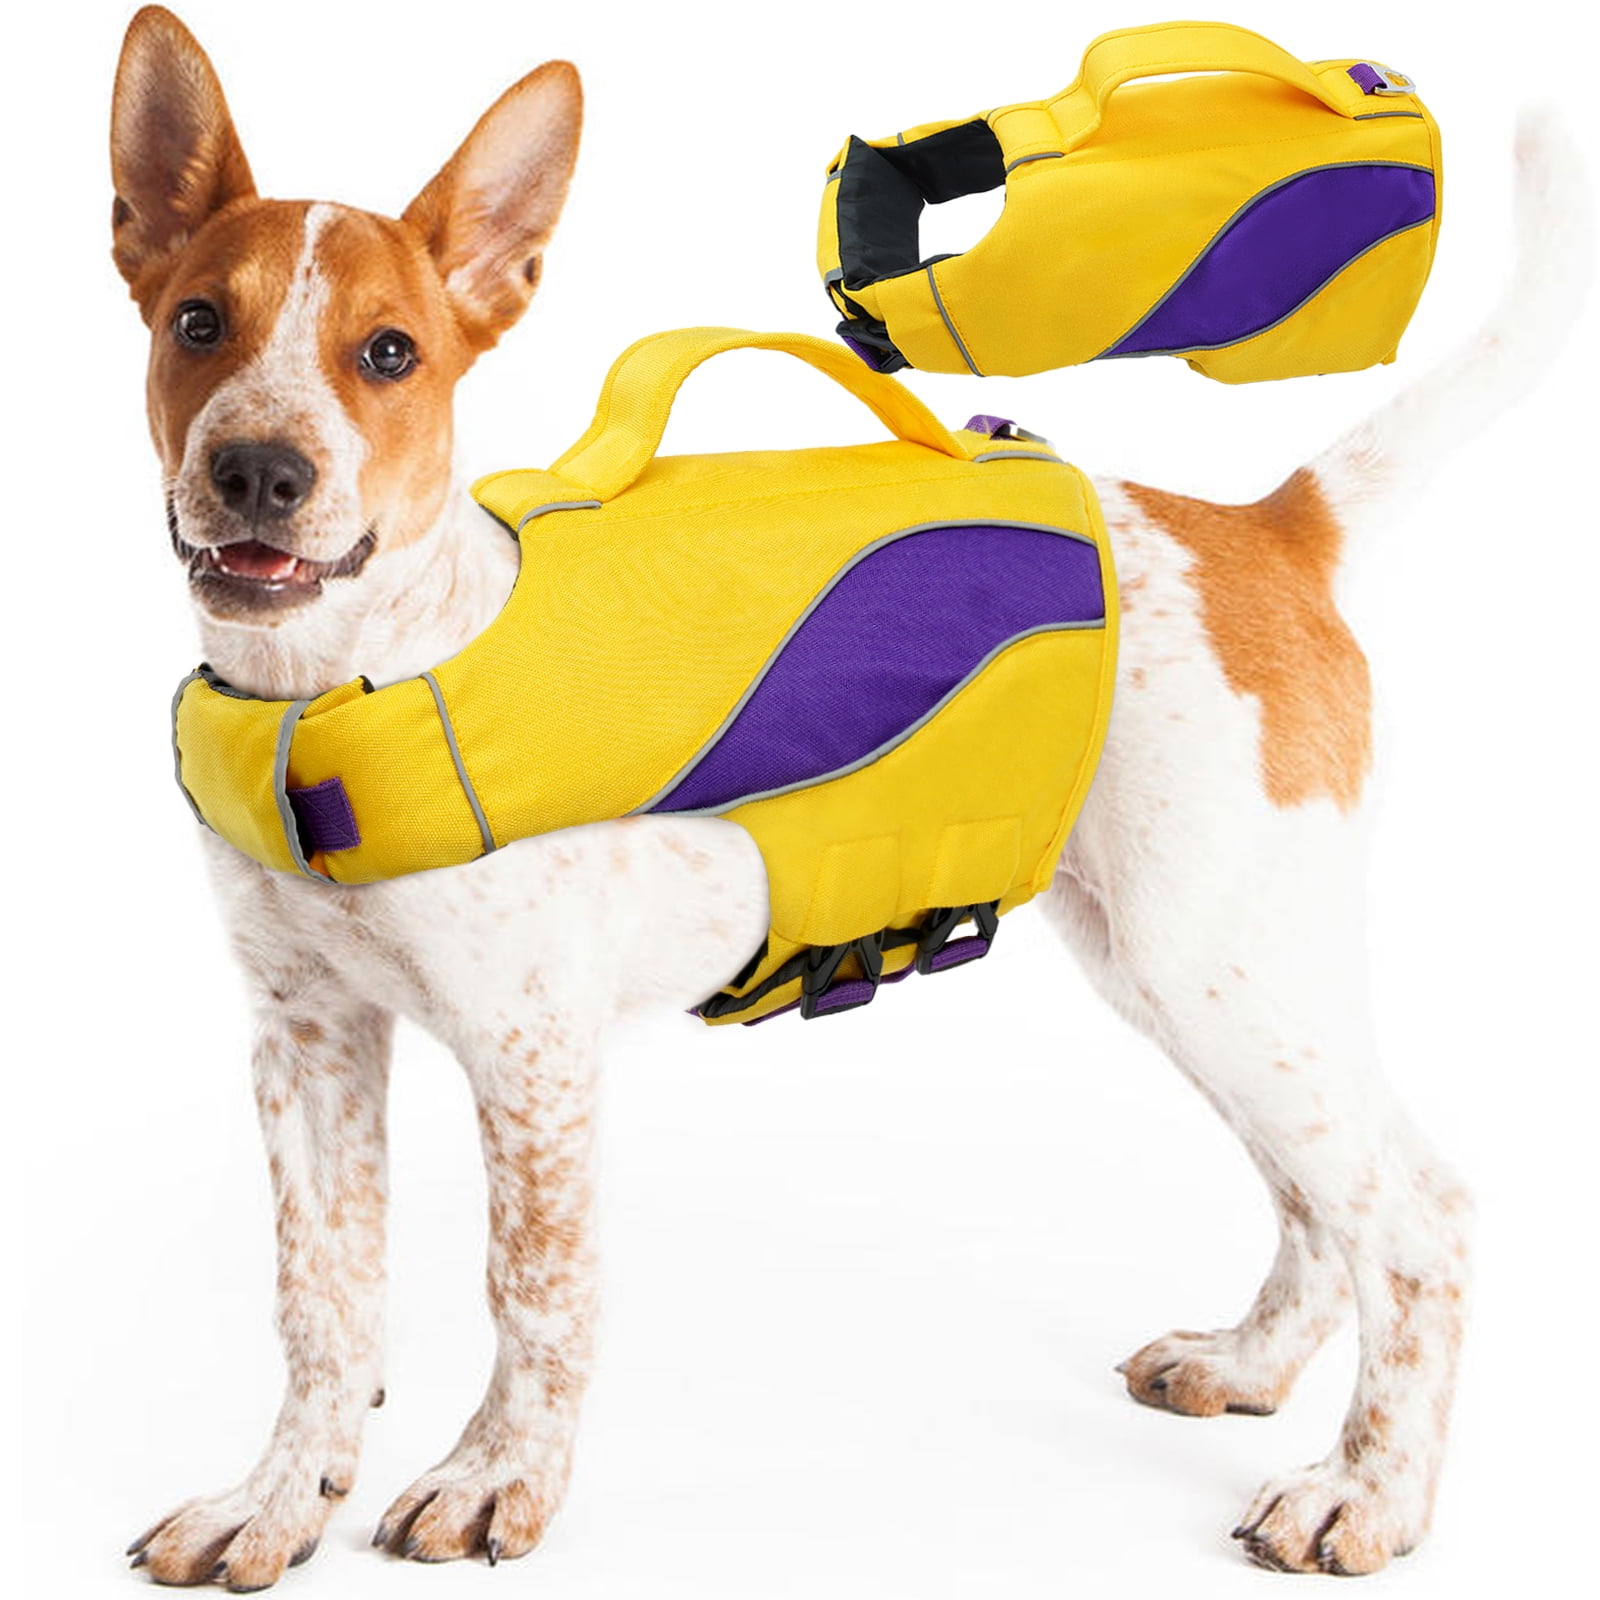 Ripstop Life Vest for Small Queenmore Dog Life Jacket Fish Style Floatation Vest with Adjustable Soft Rubber Handle Large Size Dogs Middle 